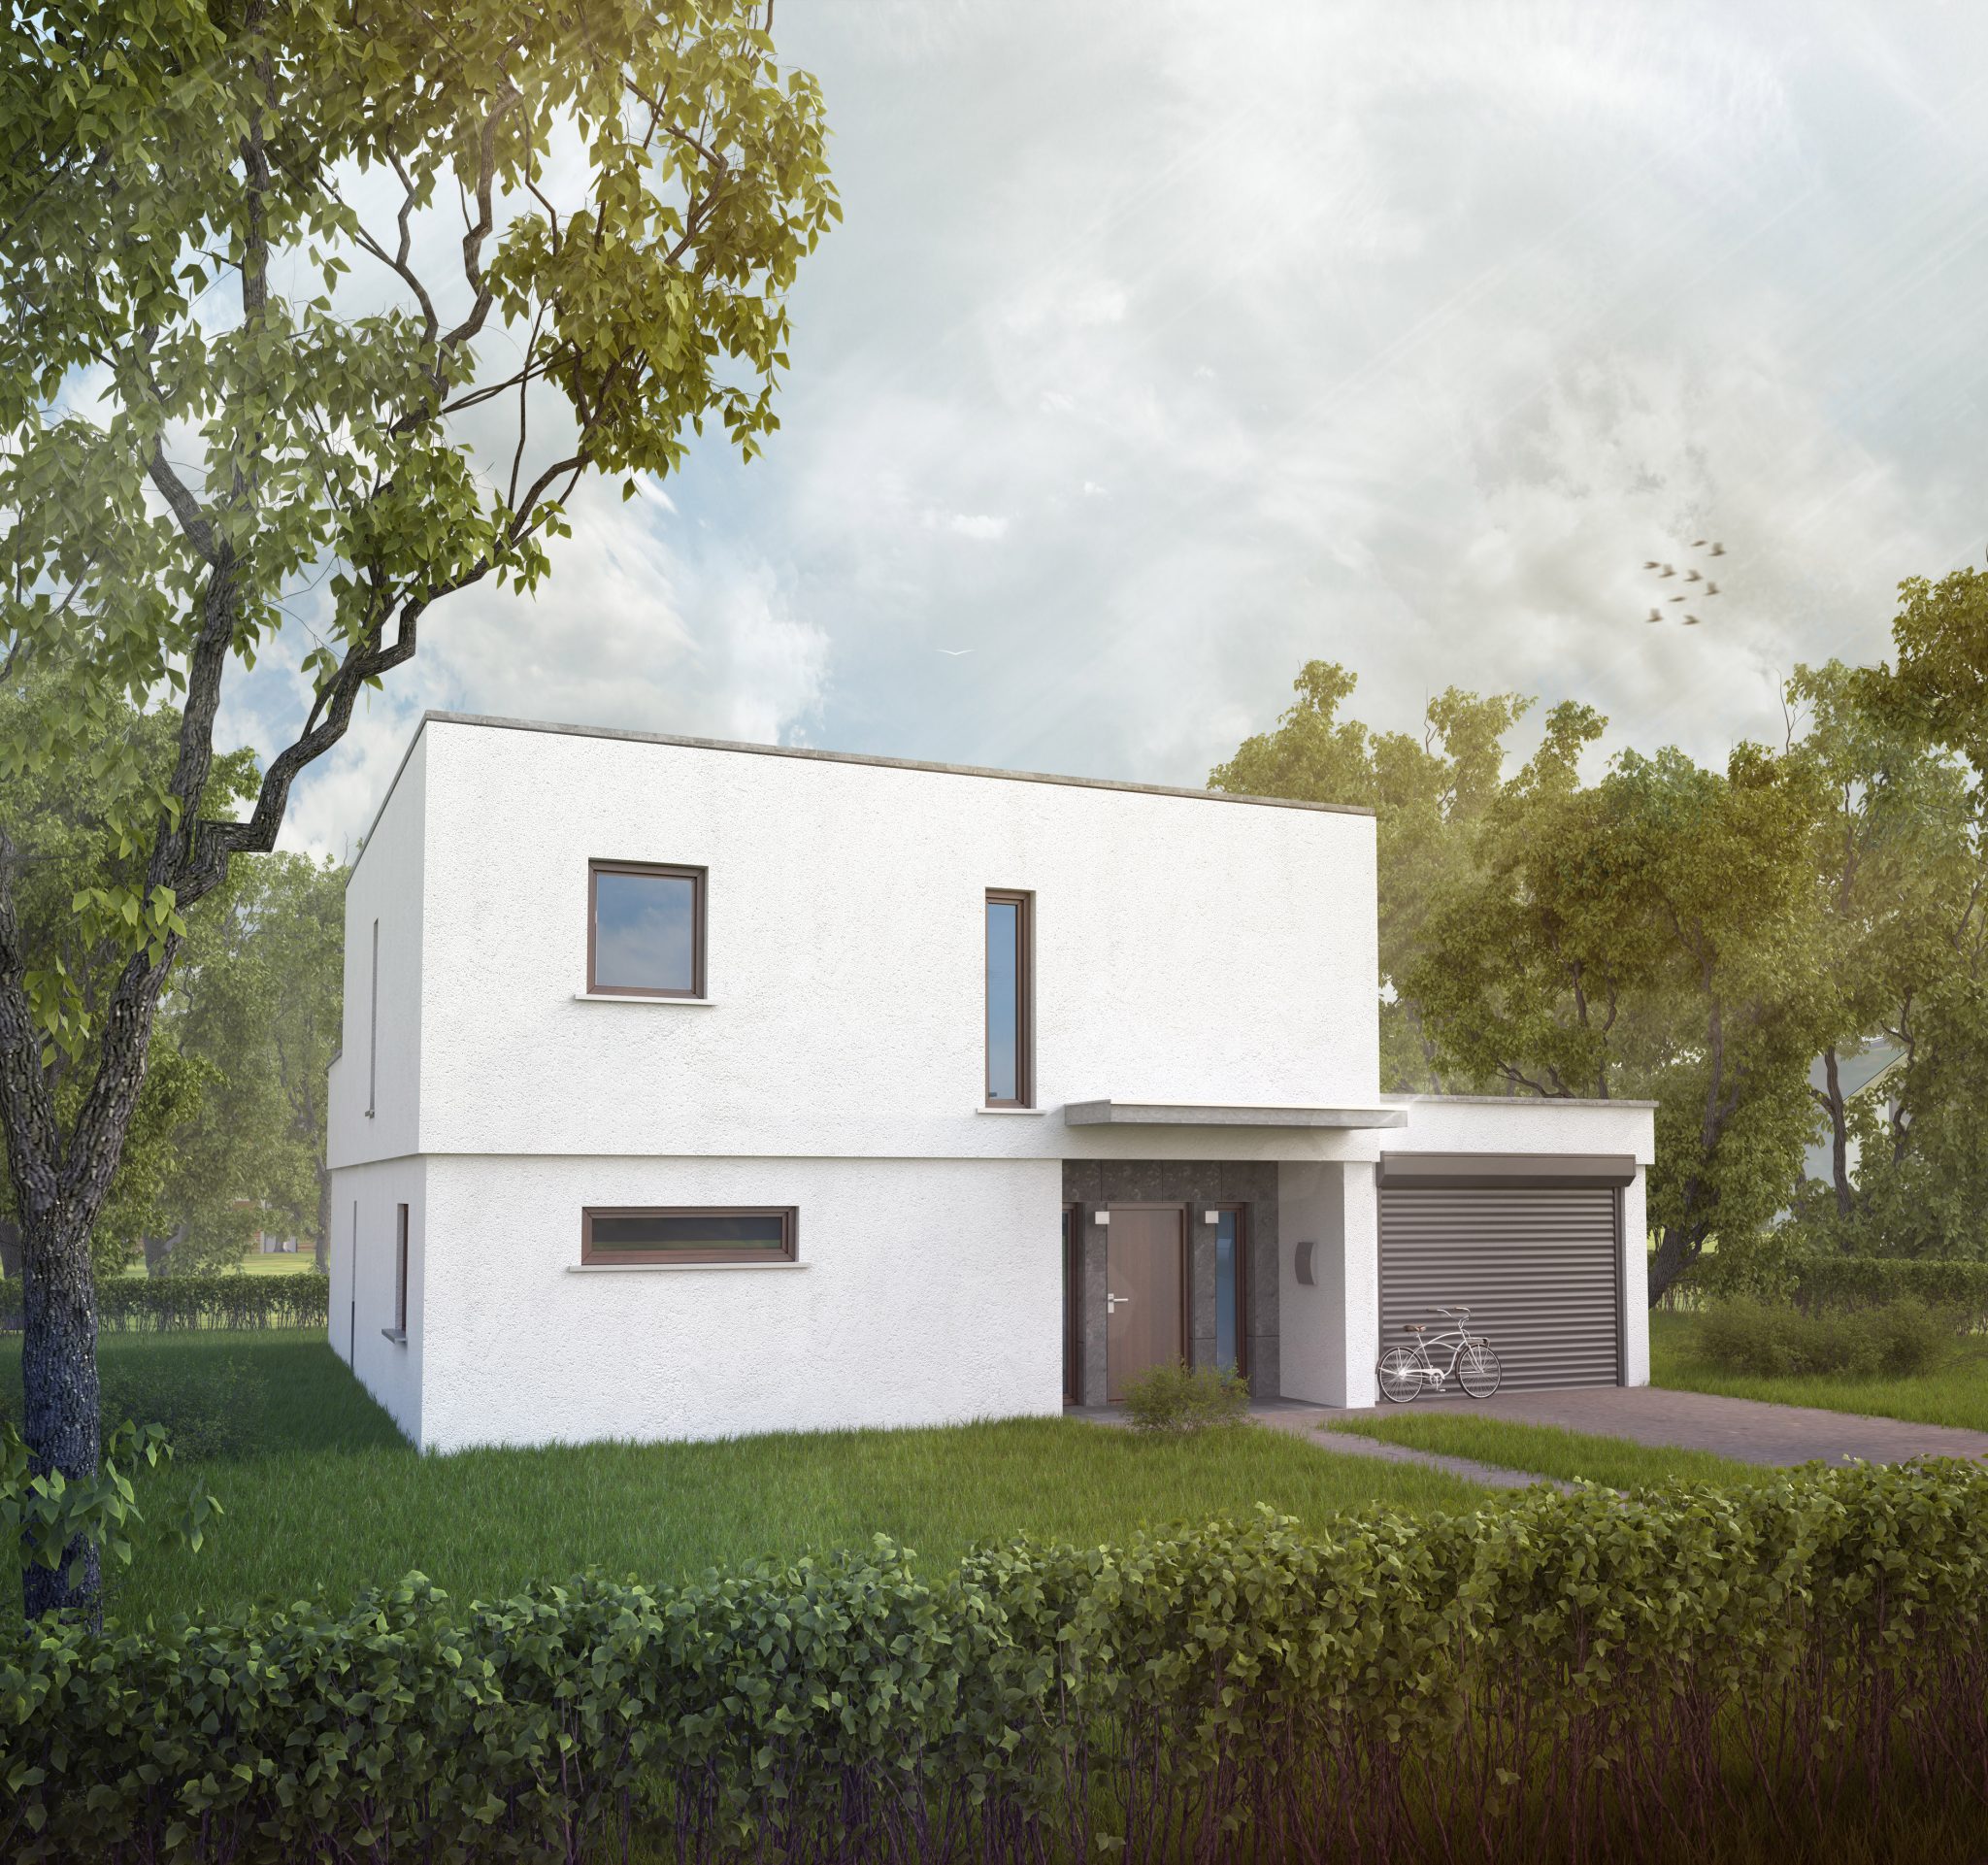 Architectural visualisations - Family houses